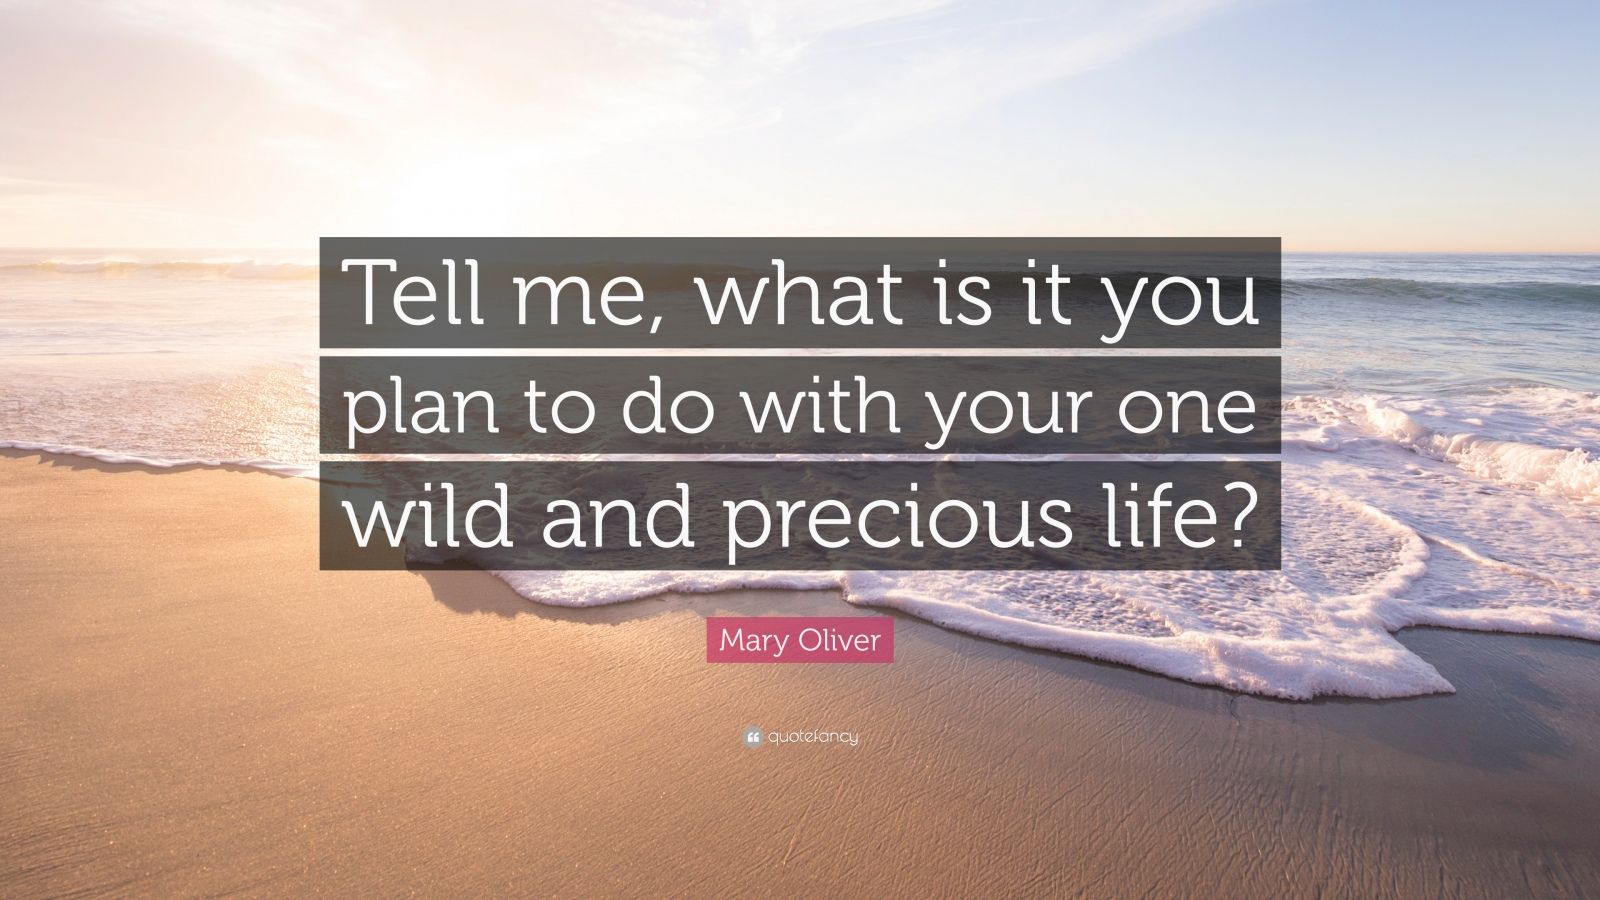 1718356 Mary Oliver Quote Tell me what is it you plan to do with your one